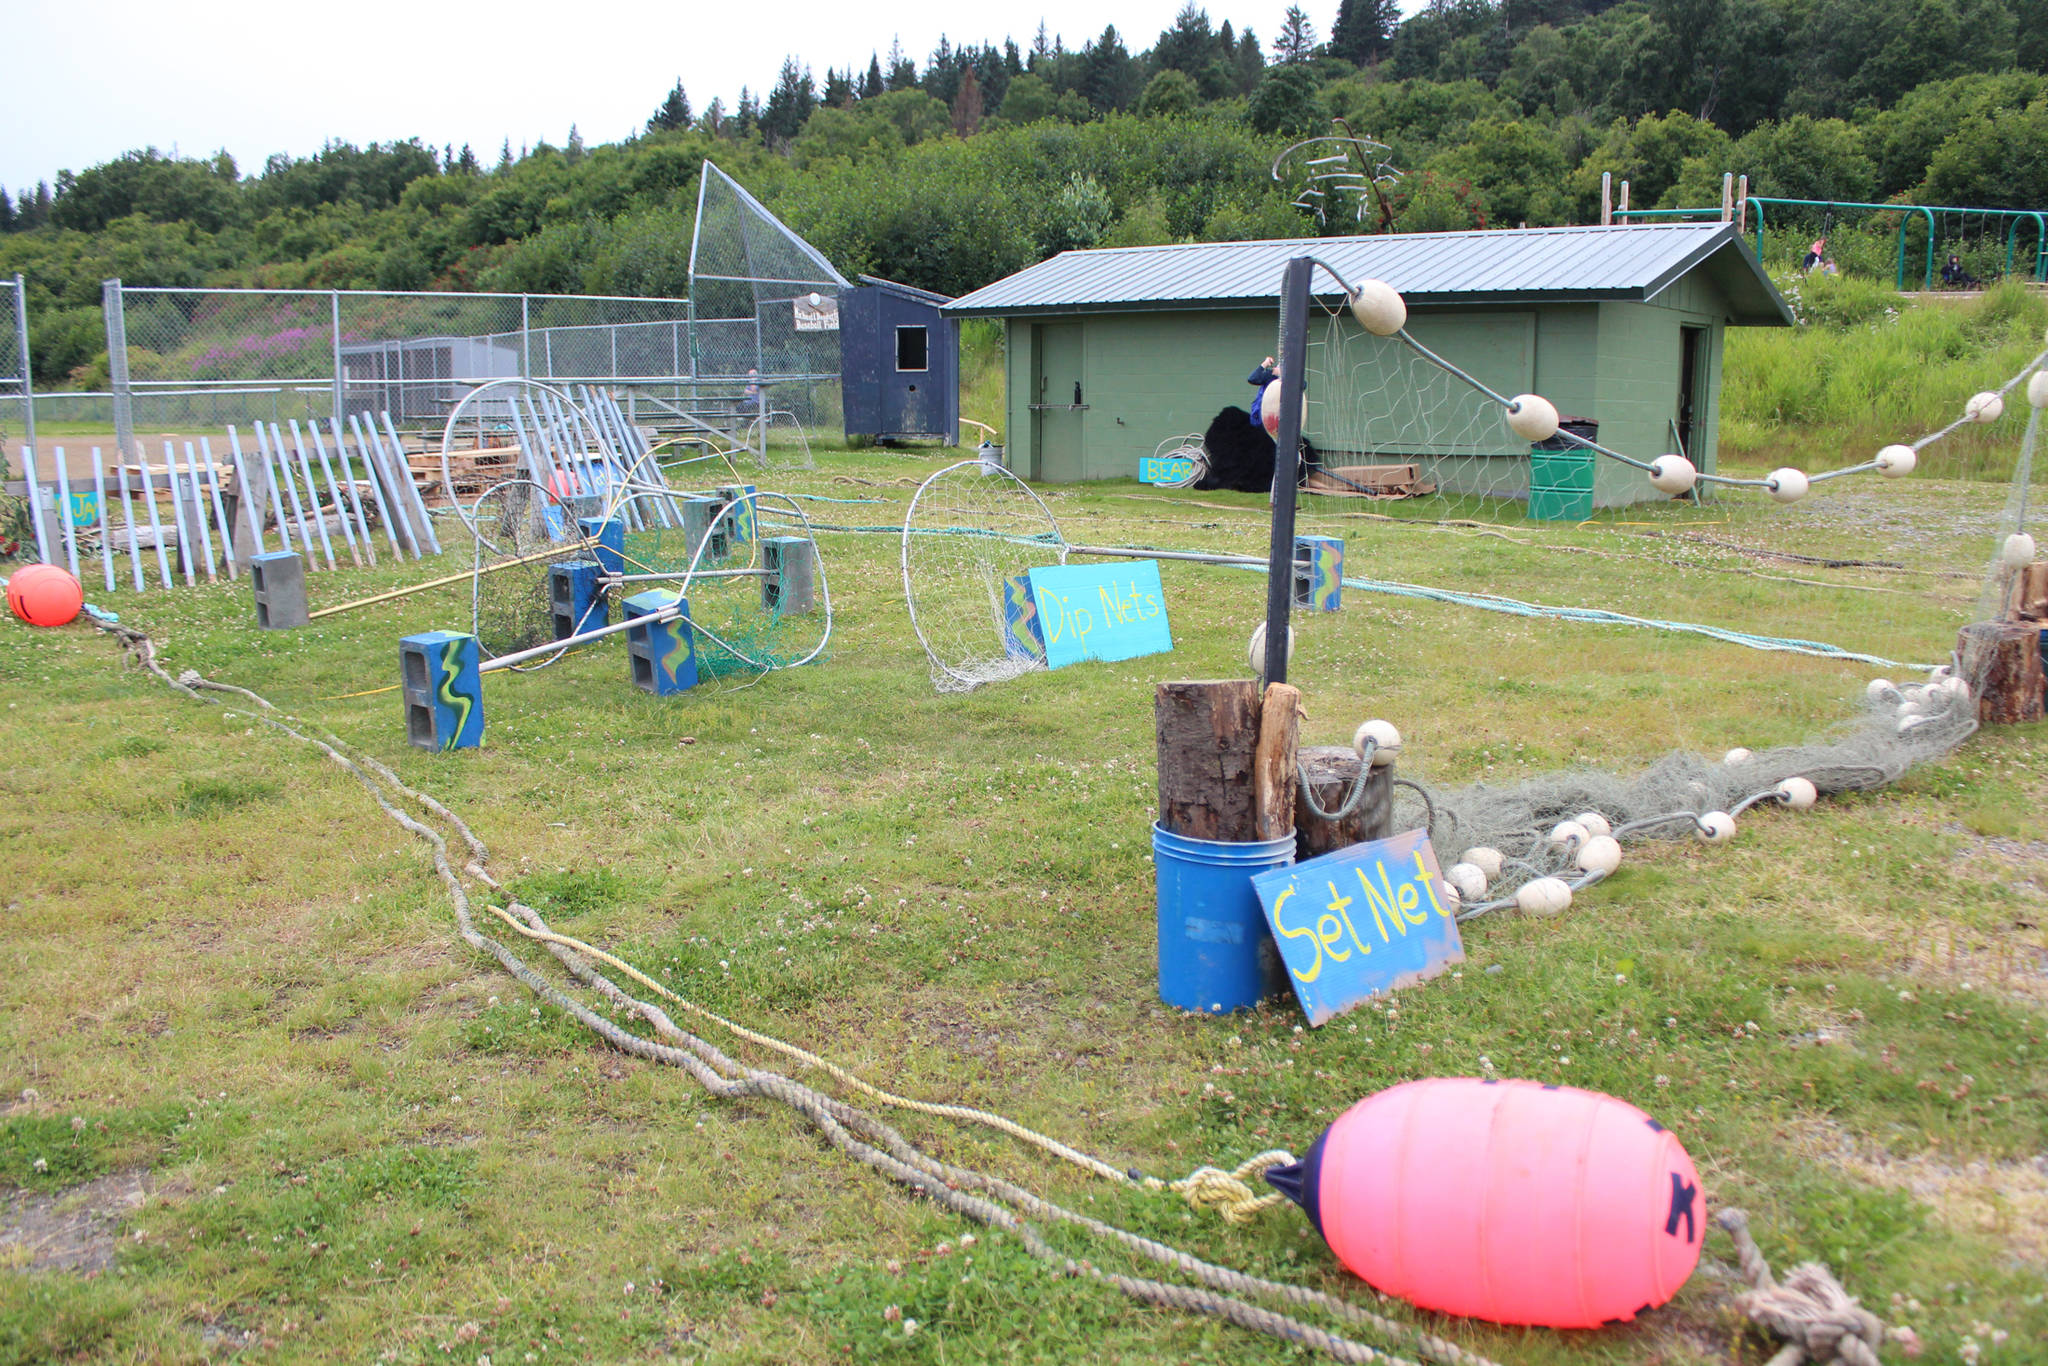 Signs identify the different stages of an obstacle course set up in Karen Hornaday Park for Alaska Wild Salmon Day on Friday, Aug. 10, 2018 in Homer, Alaska. Kids had to think like salmon to get through the set nets, dipnets, the weir, and other obstacles. (Photo by Megan Pacer/Homer News)